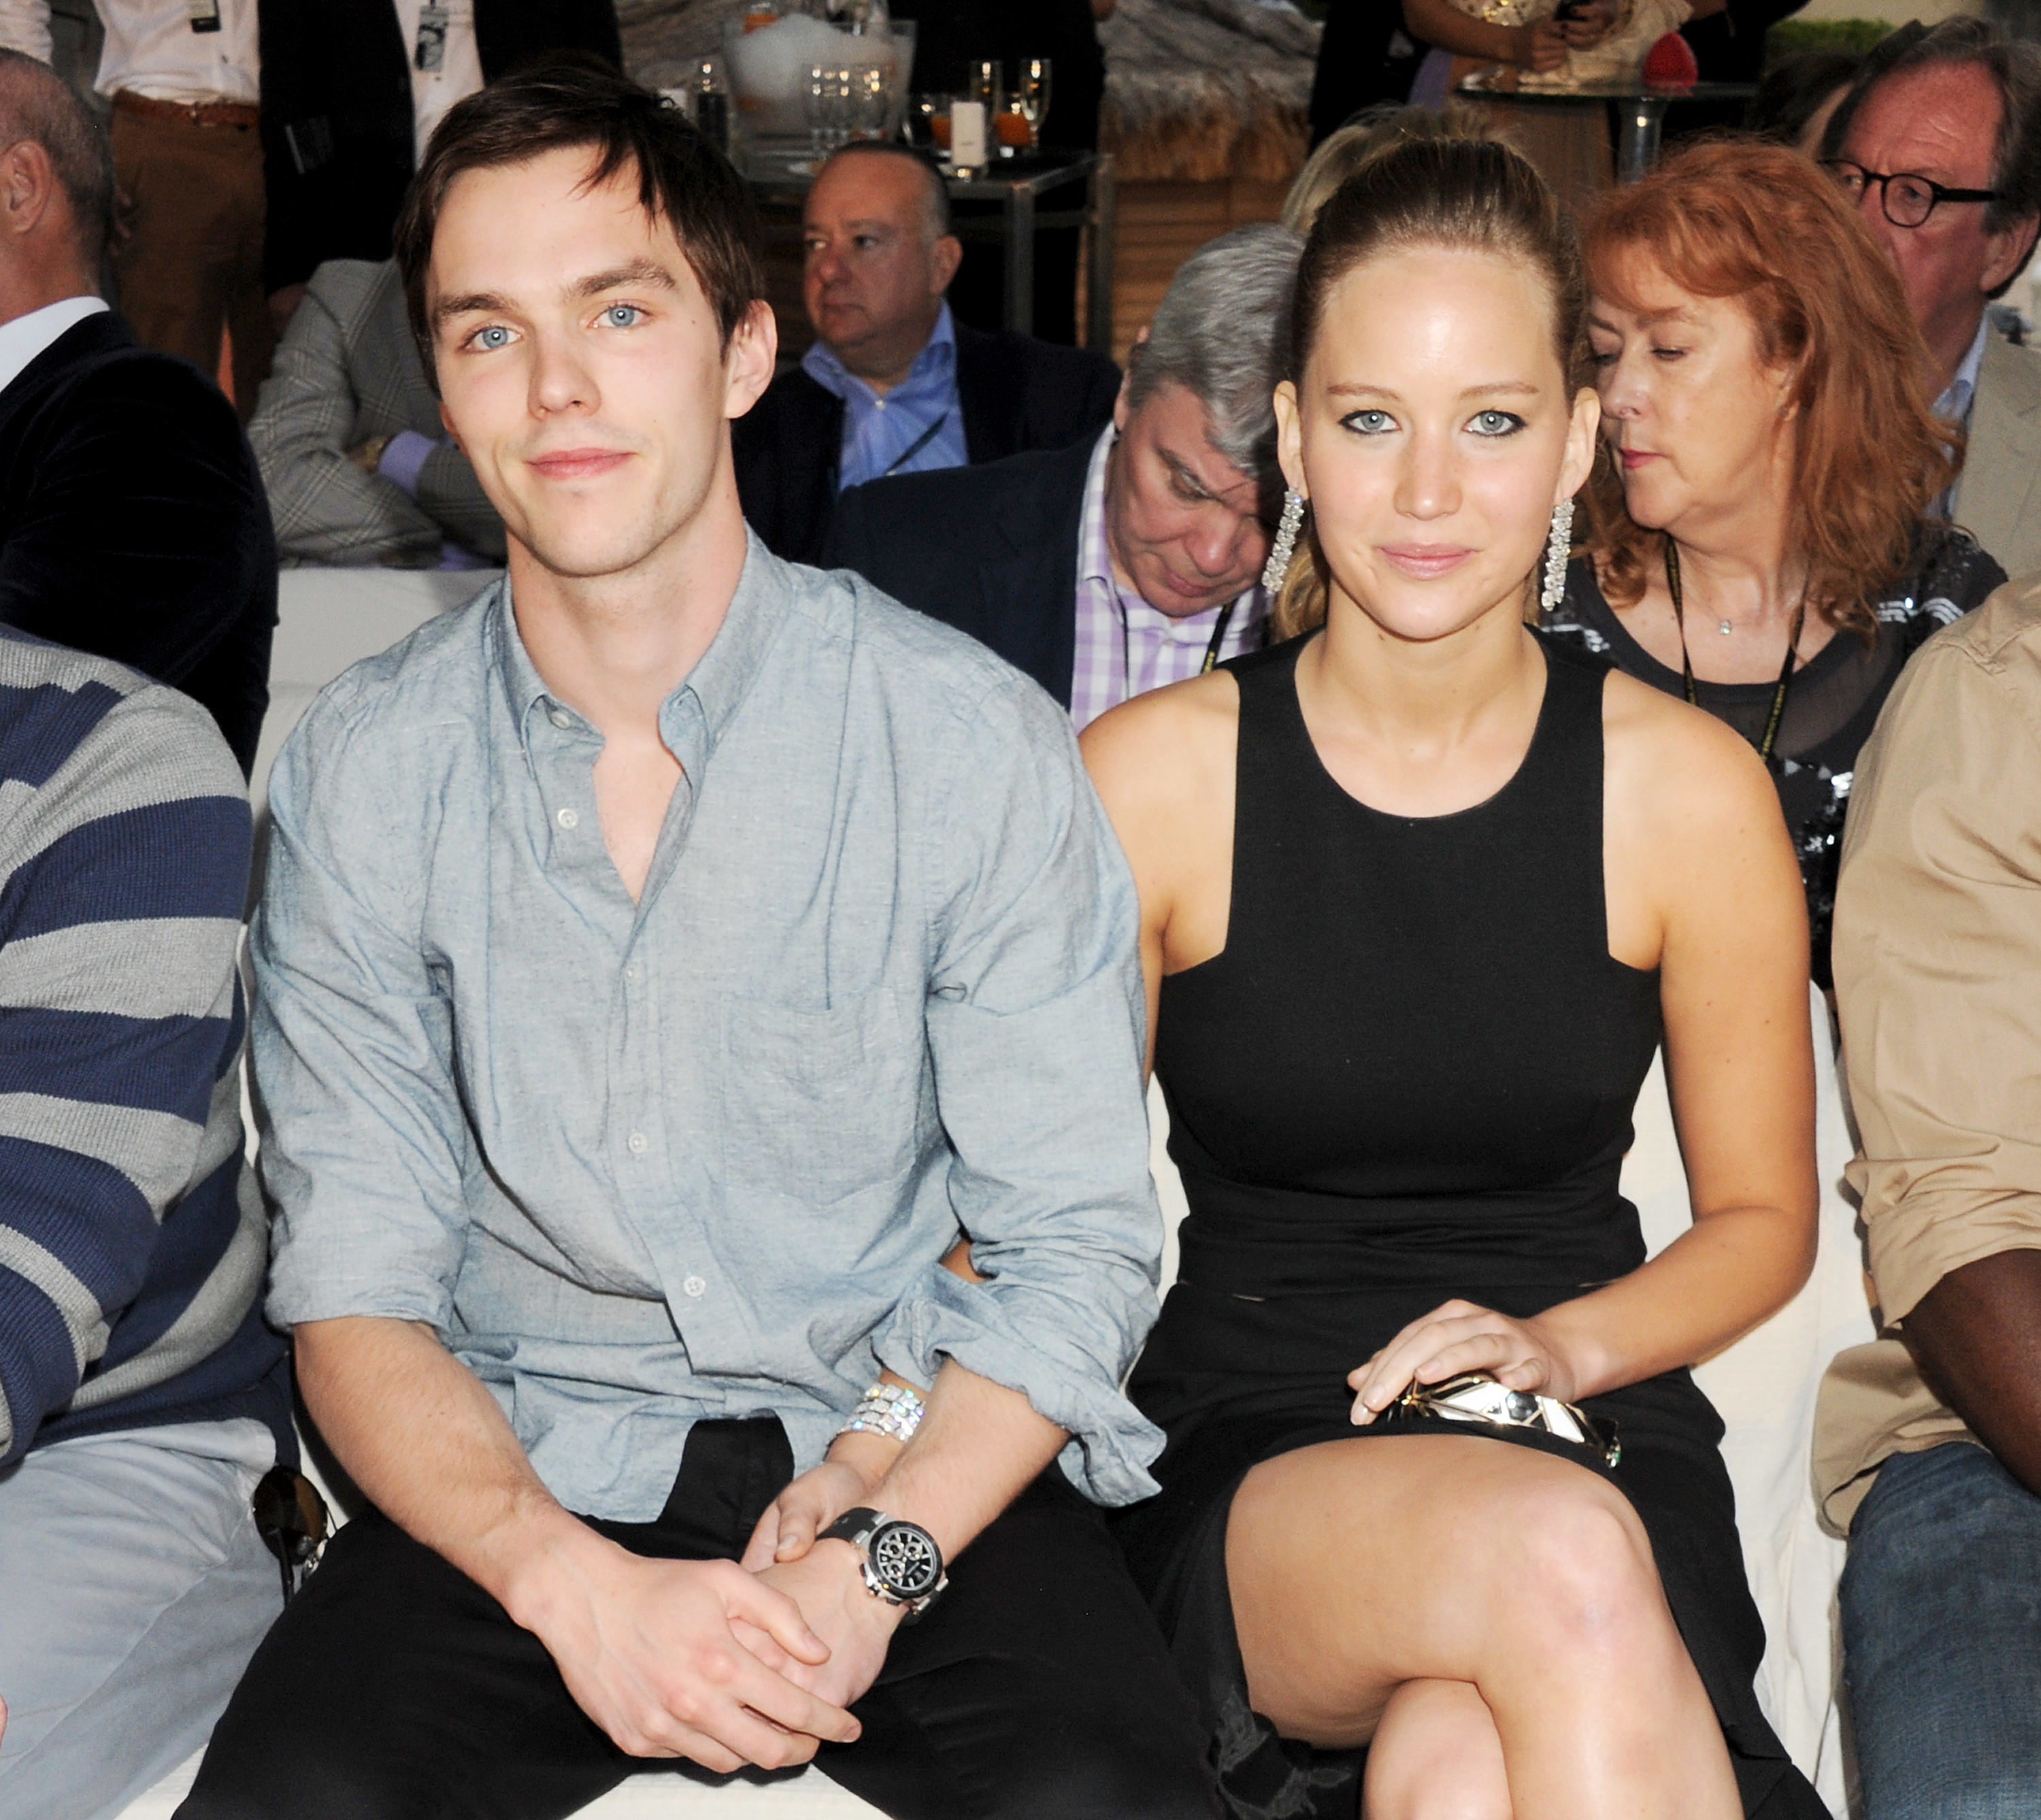 Nicholas Hoult and Jennifer Lawrence holding hands at an event